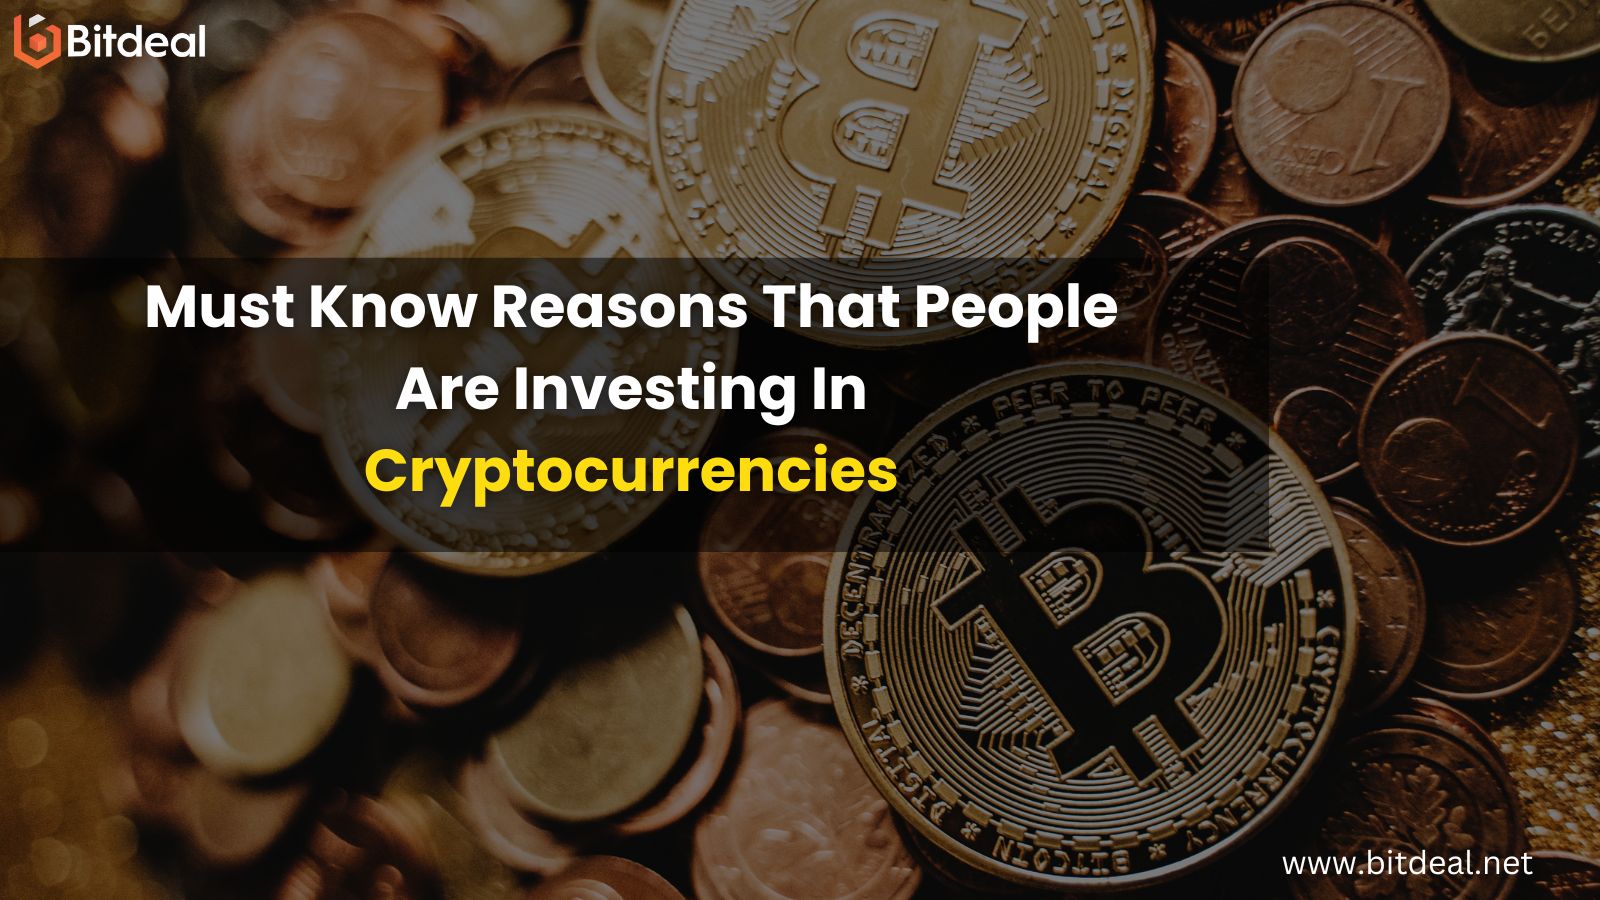 Must Know Reasons That People Are Investing In Cryptocurrencies